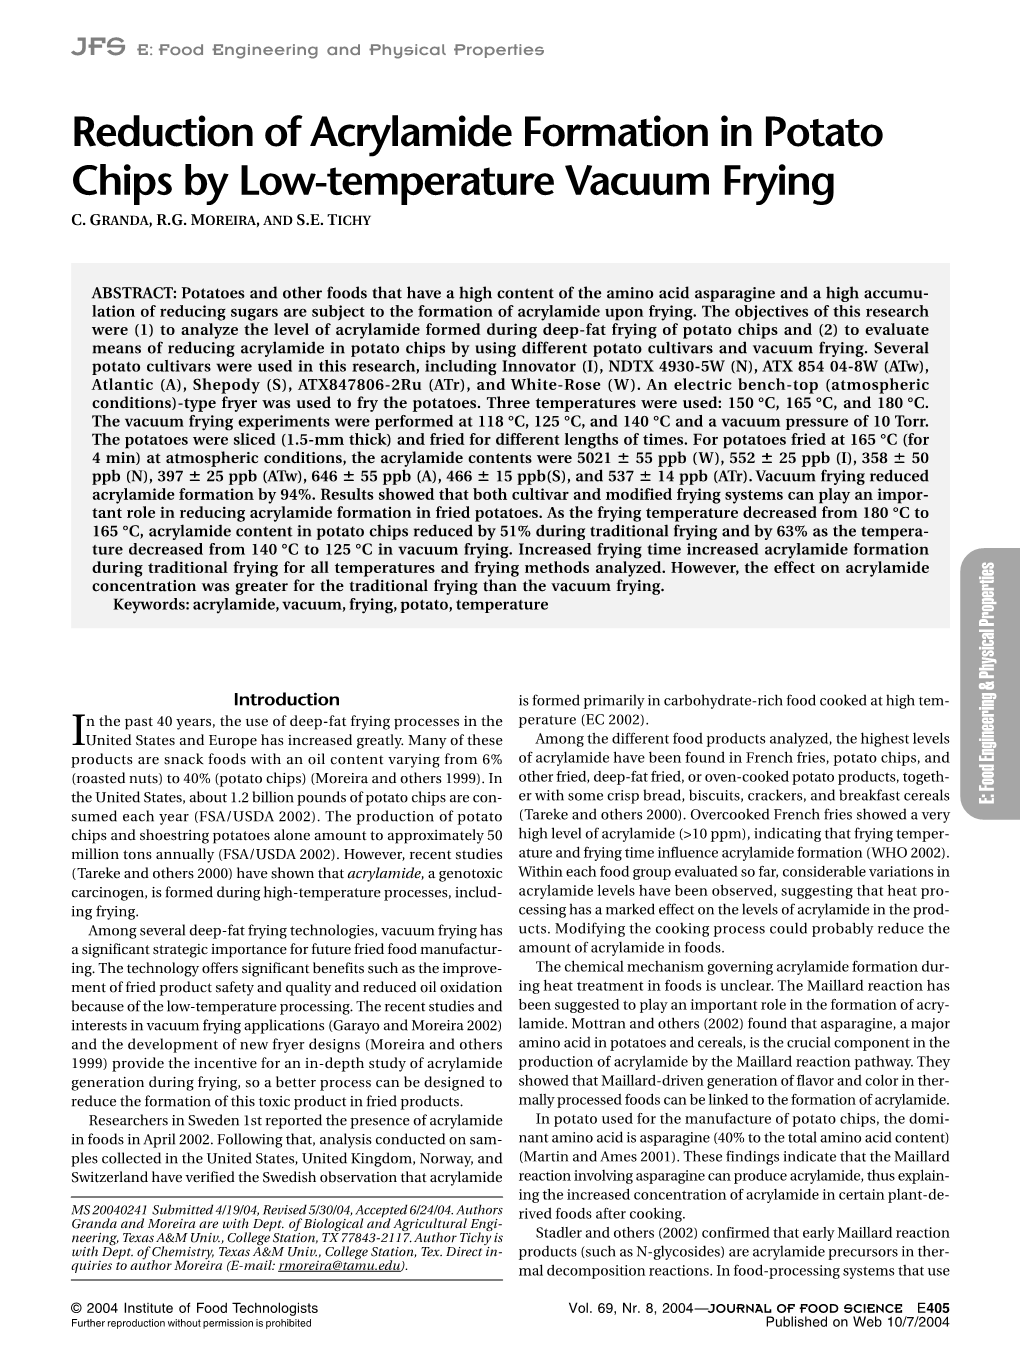 Reduction of Acrylamide Formation in Potato Chips by Low-Temperature Vacuum Frying C